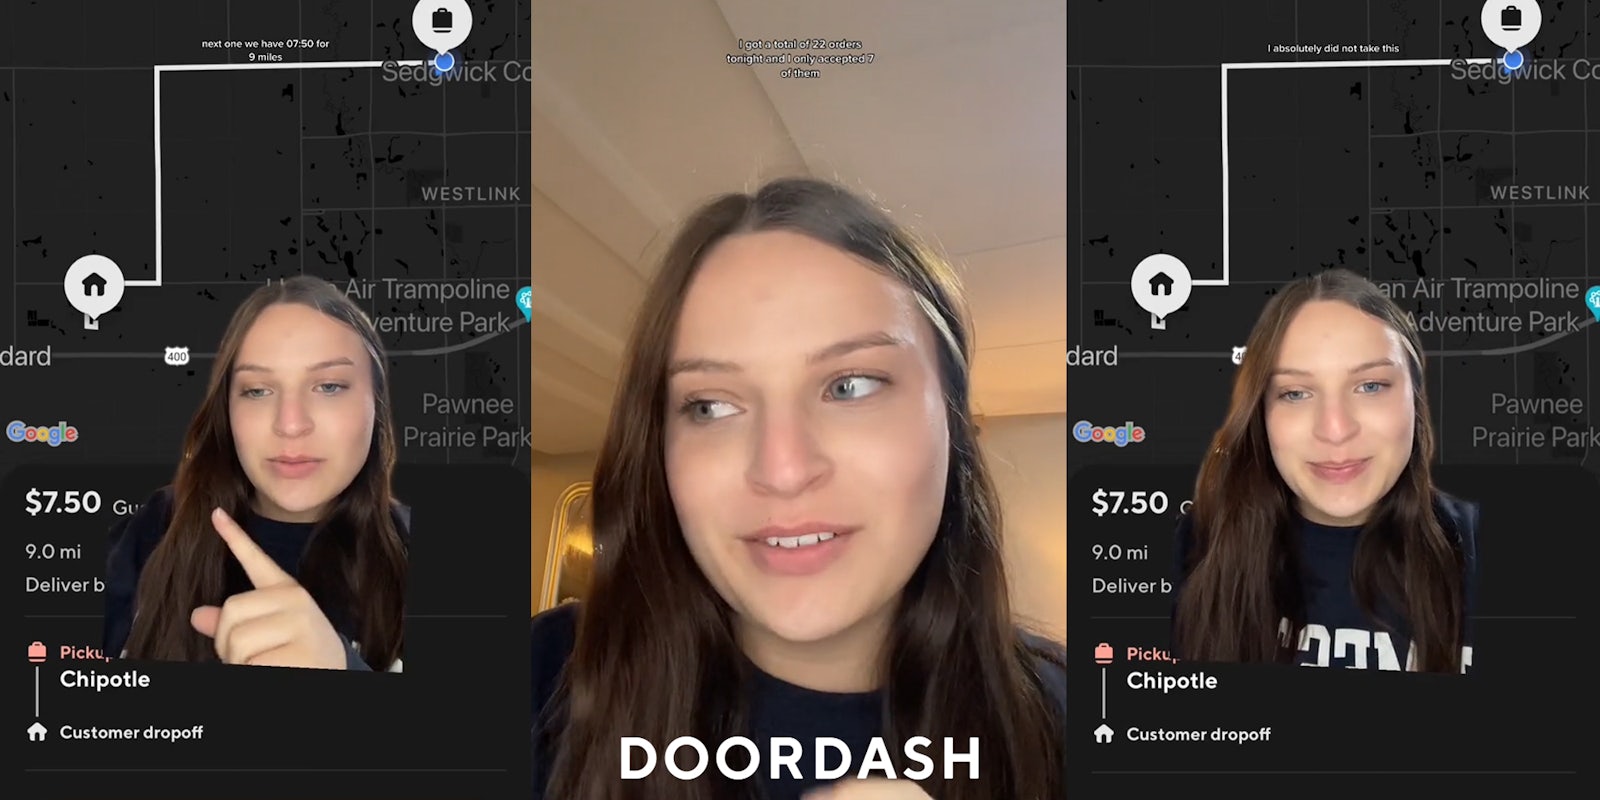 DoorDash employee greenscreen TikTok over image of order with caption 'next one we have $7.50 for 9 miles' (l) DoorDash employee speaking in front of tan walls with DoorDash logo at bottom and caption 'I got a total of 22 orders tonight. And I only accepted 7 of them' (c) DoorDash employee greenscreen TikTok over image of order with caption 'I absolutely did not take this' (r)